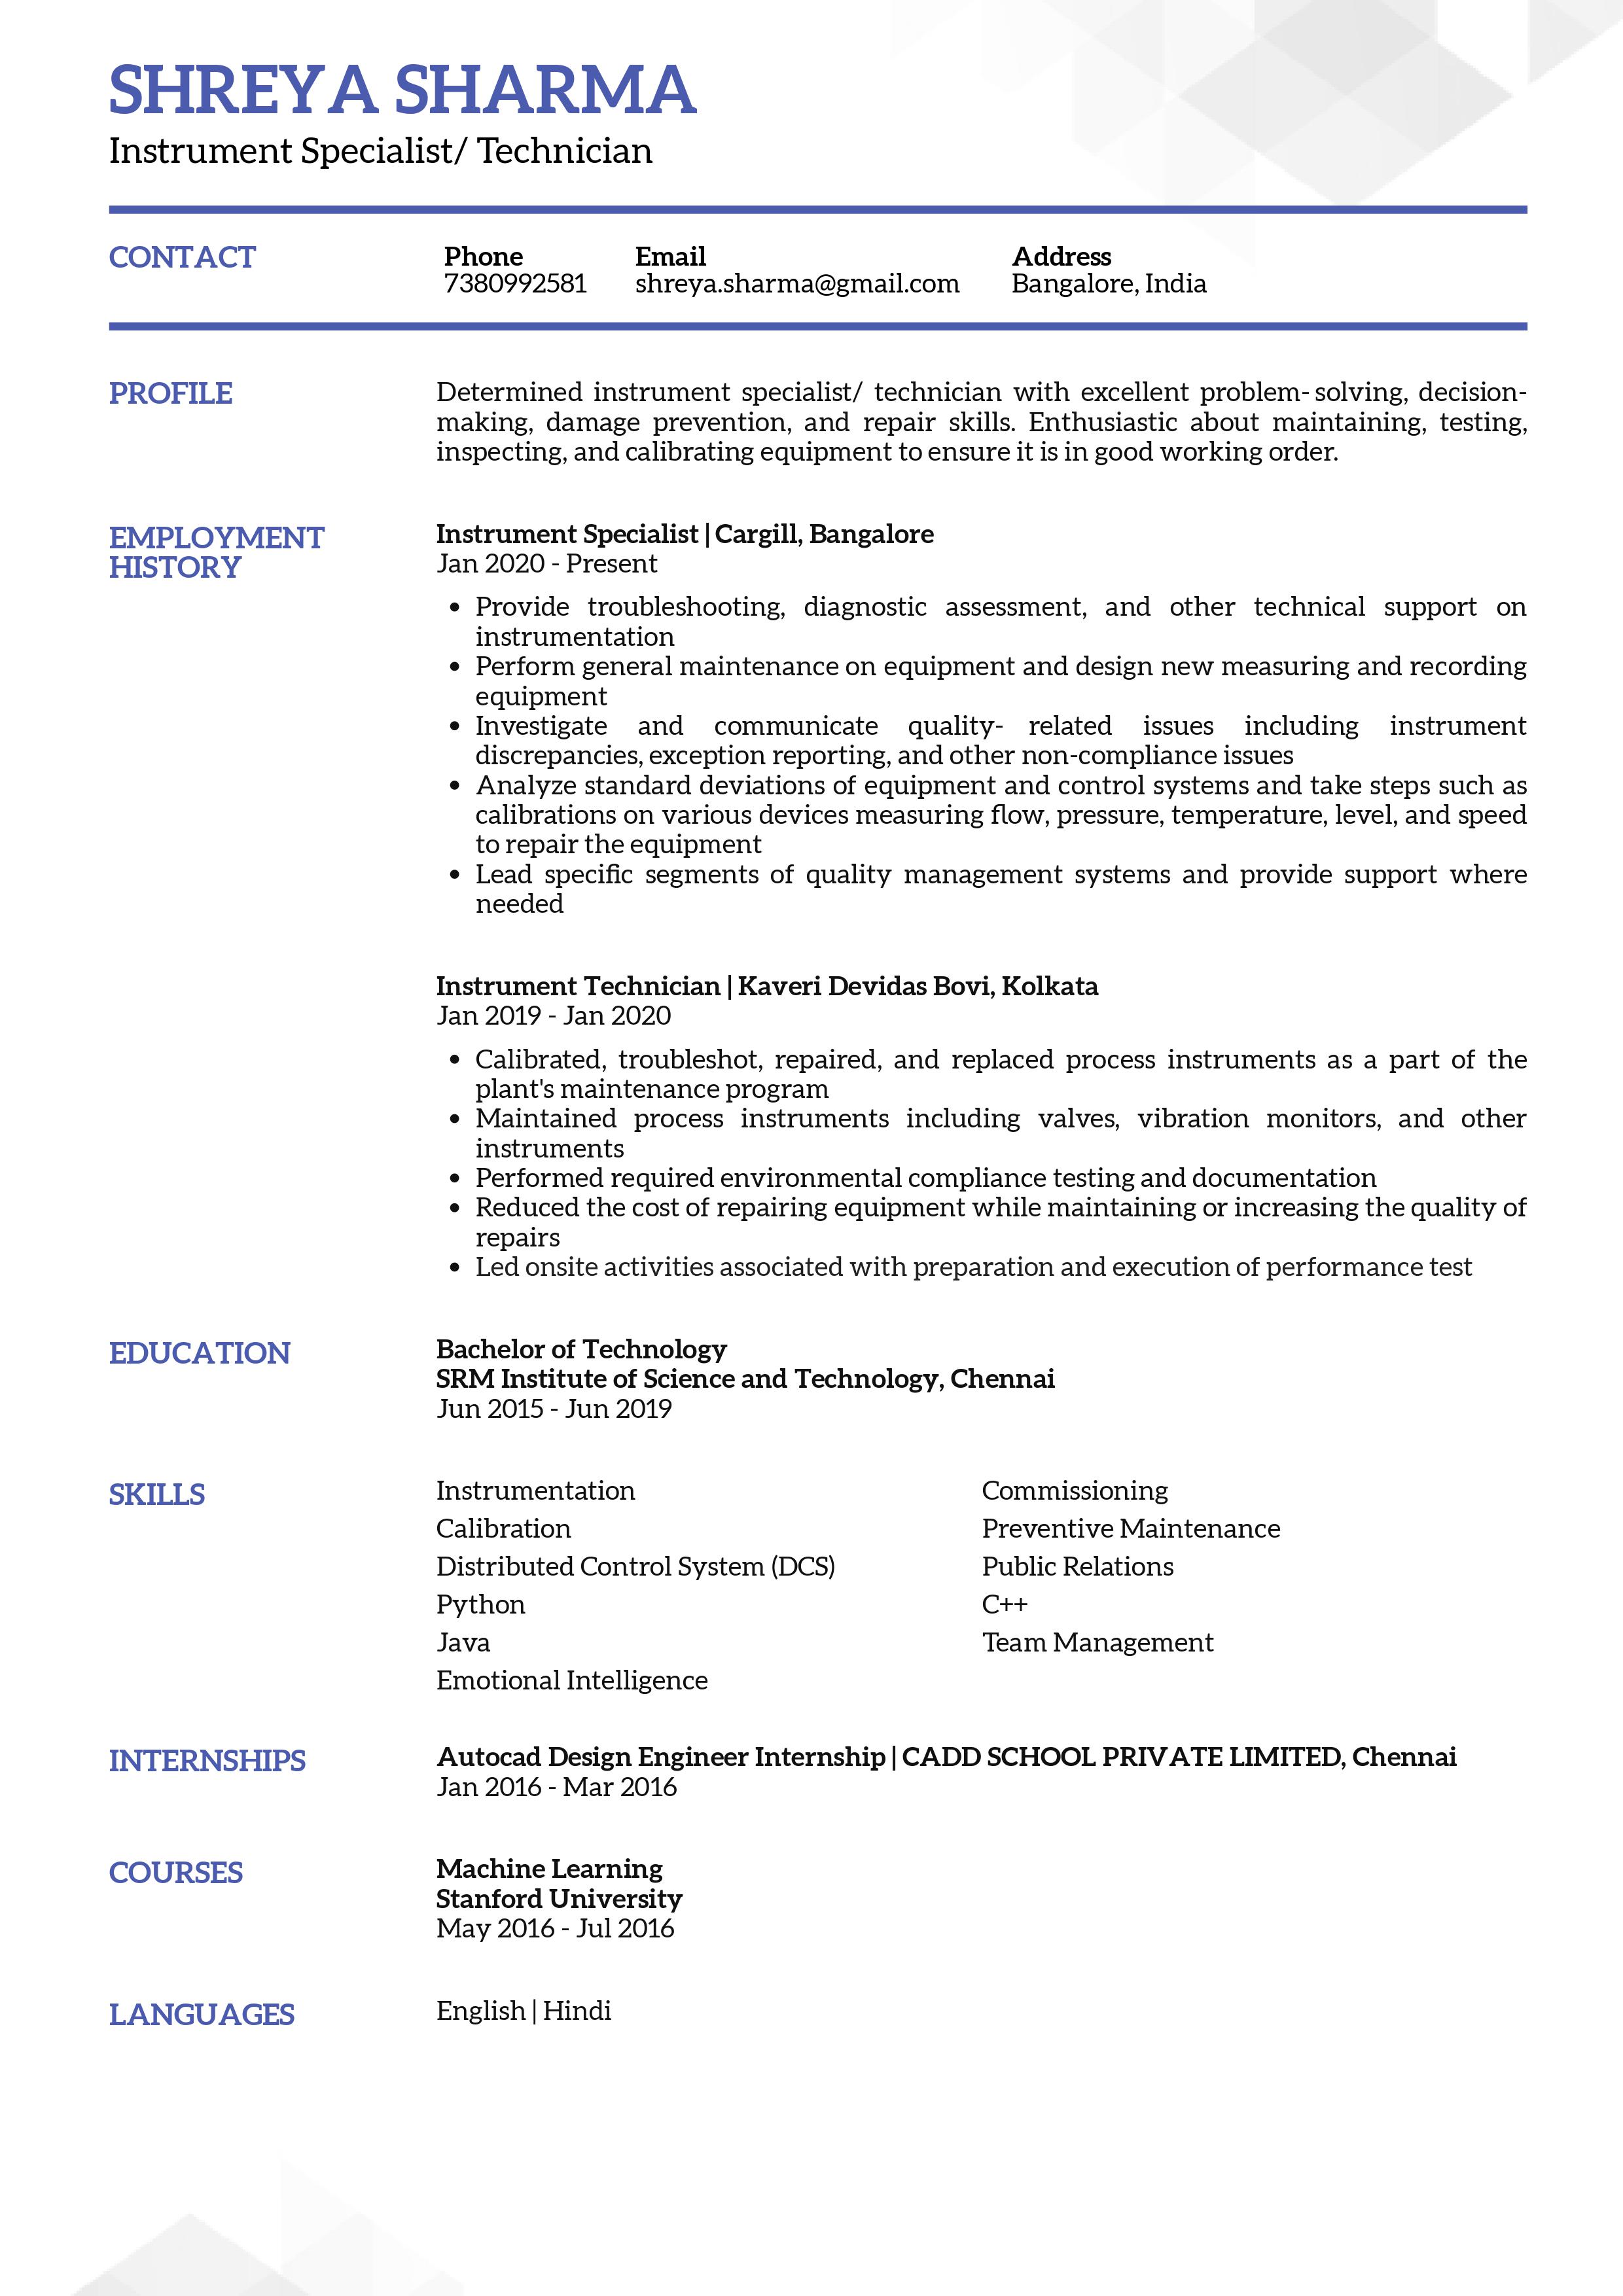 Sample Resume of Instrument Technician | Free Resume Templates & Samples on Resumod.co